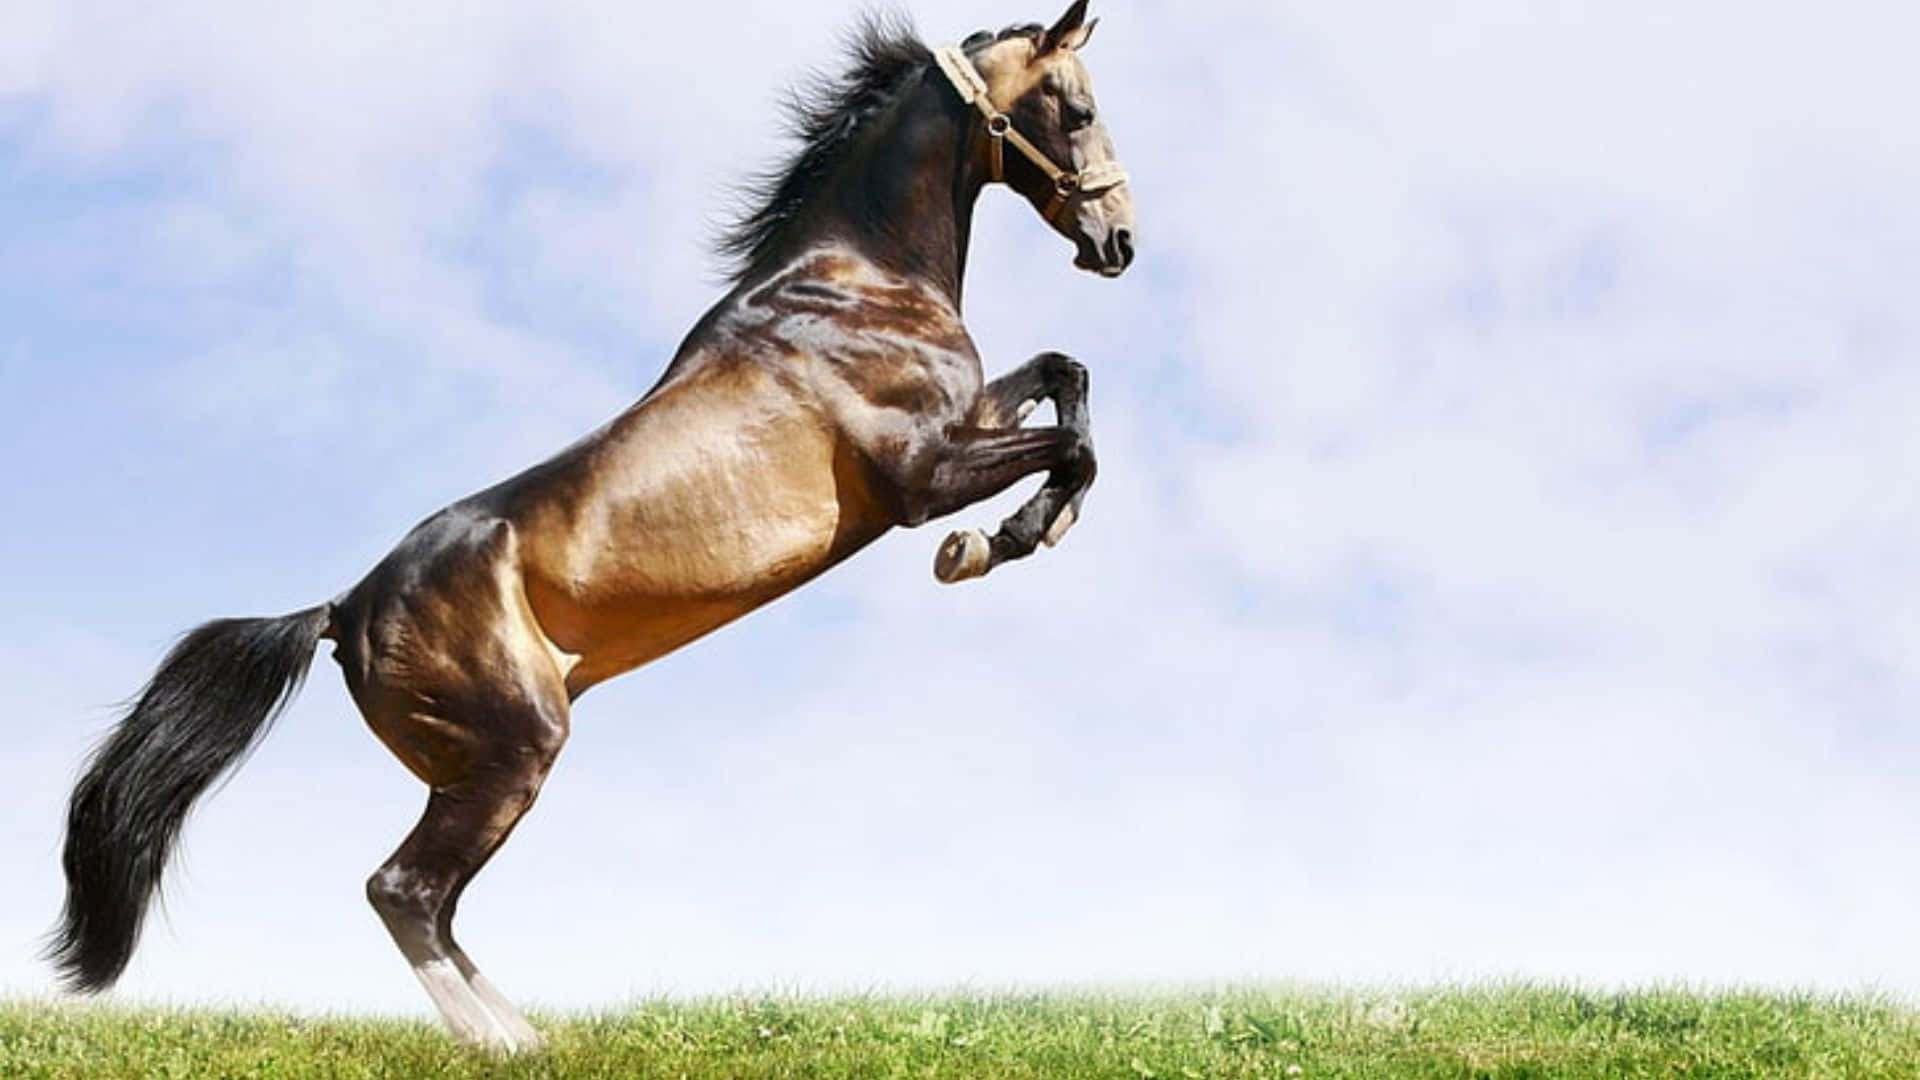 A powerful Cool Horse stands tall with its mane swept in the wind. Wallpaper